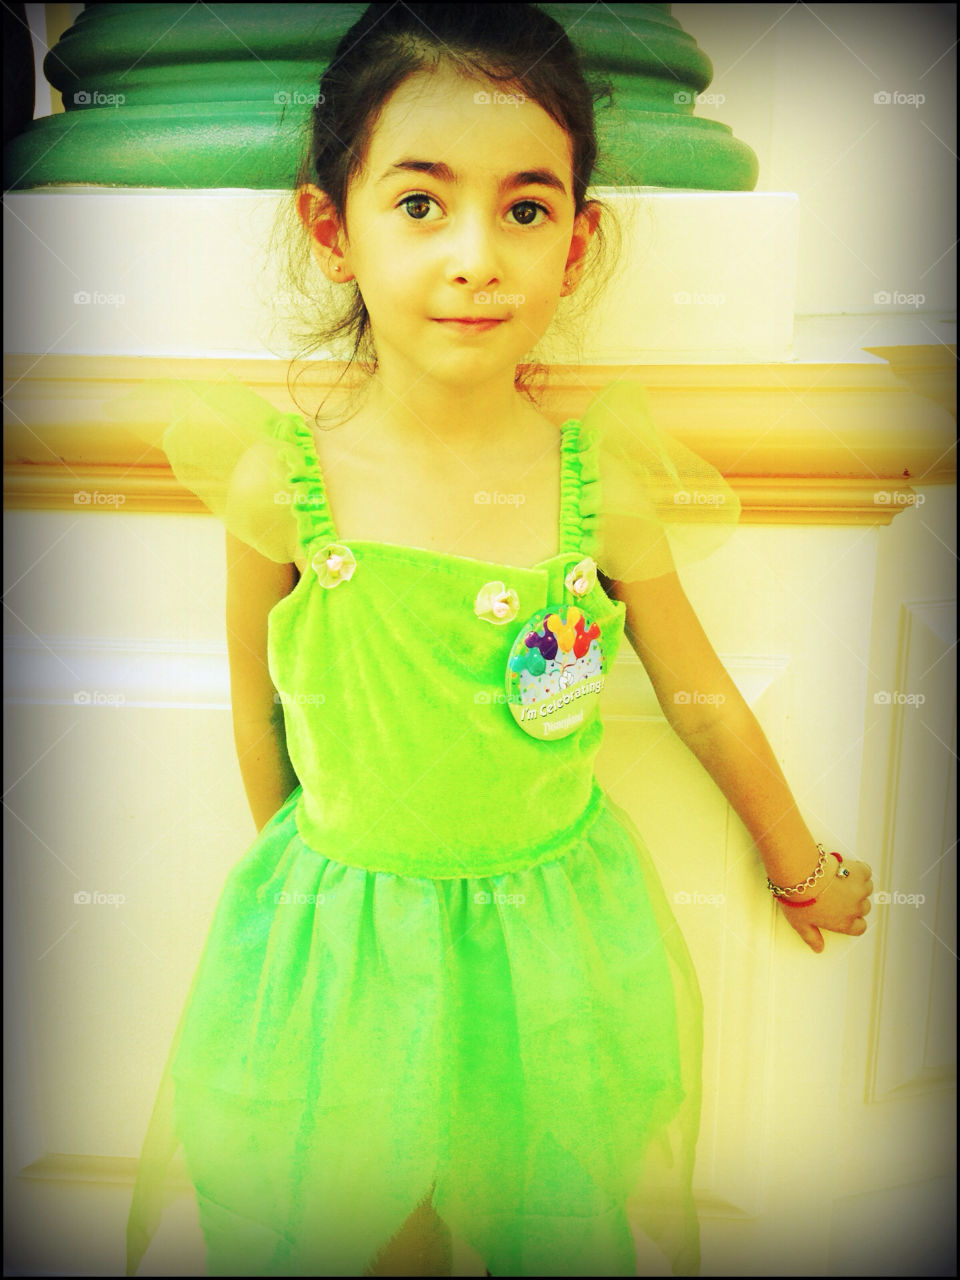 my tinkerbell by karla4mois